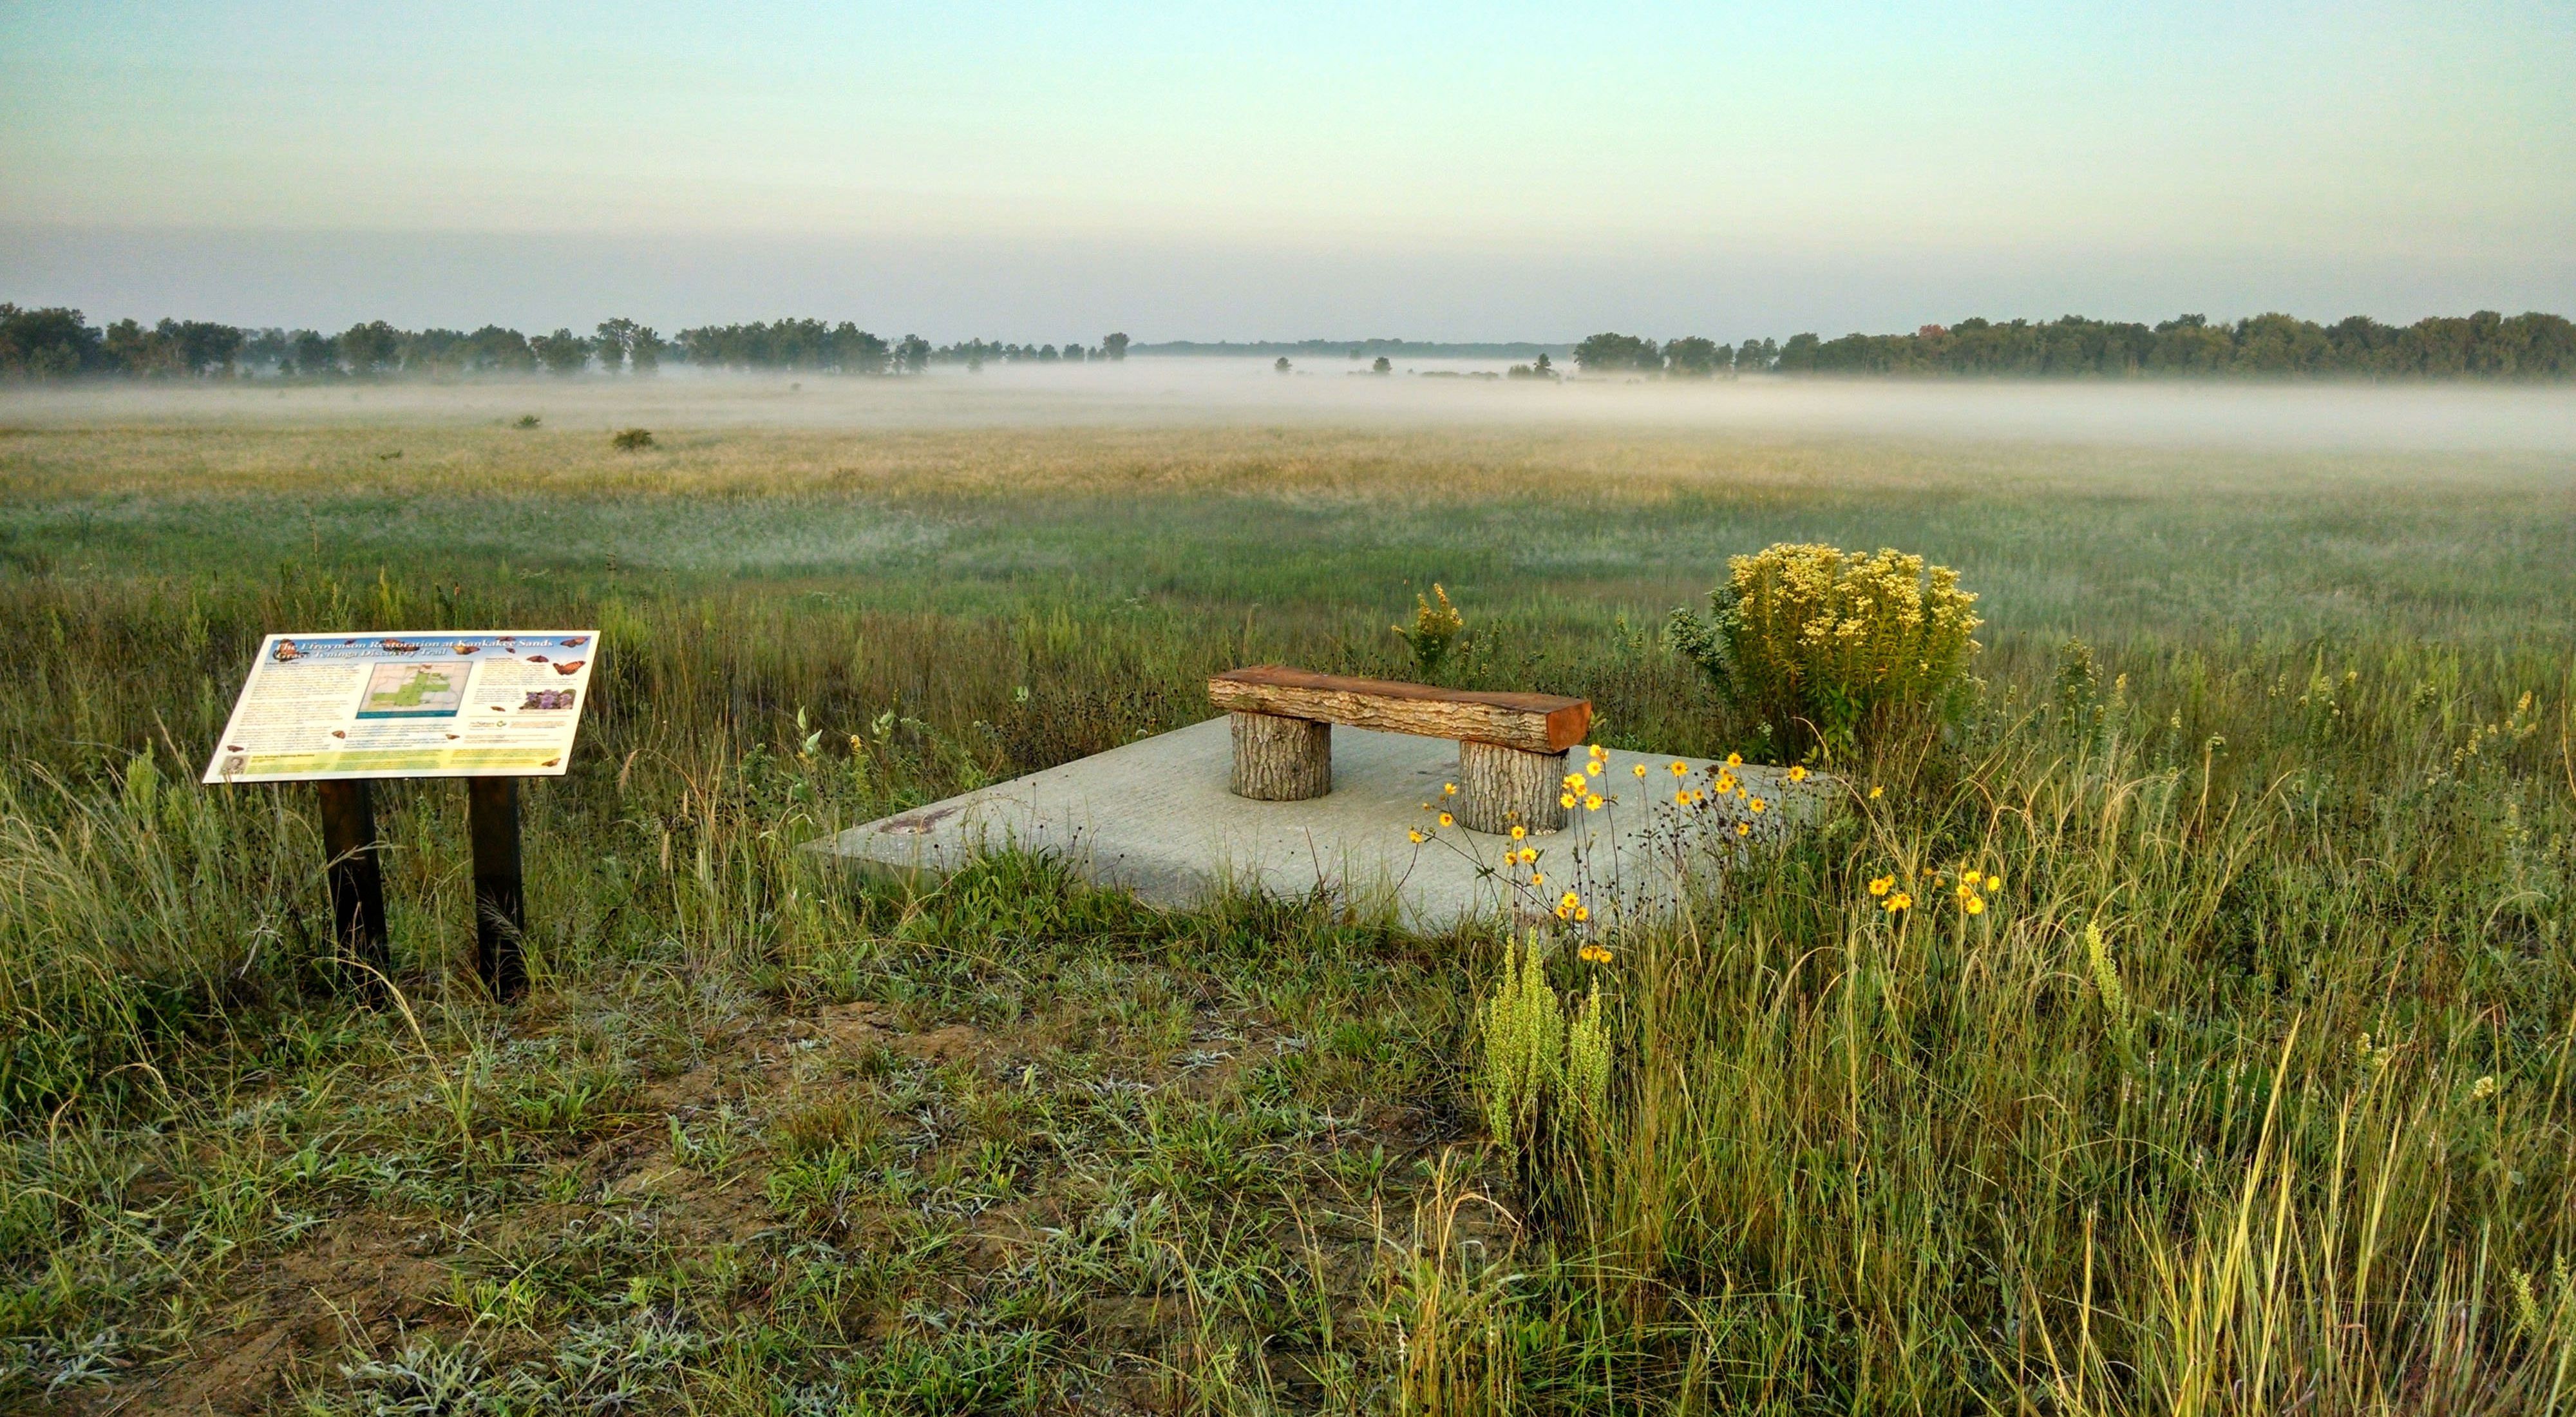 Wooden bench and interpretive sign on a misty morning at Kankakee Sands.